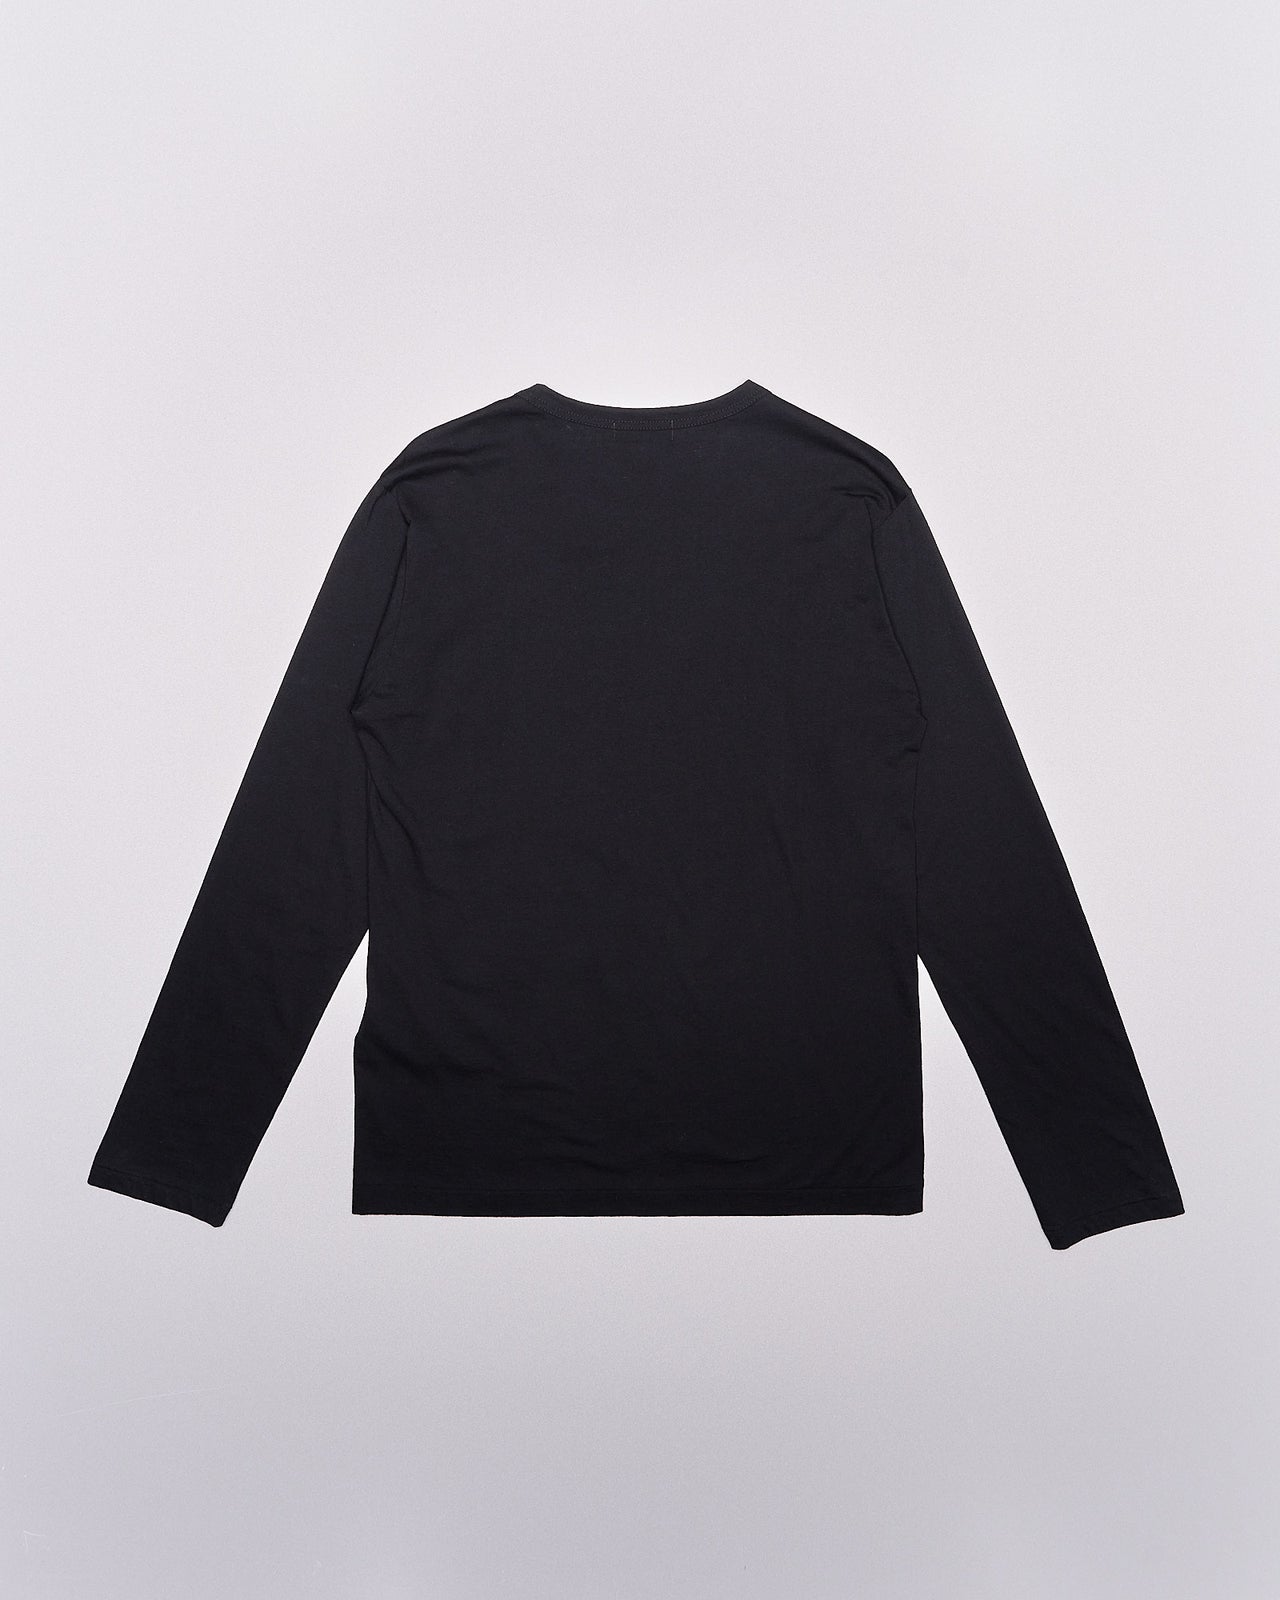 Pour Homme AW 2014 dragon long sleeve t-shirt